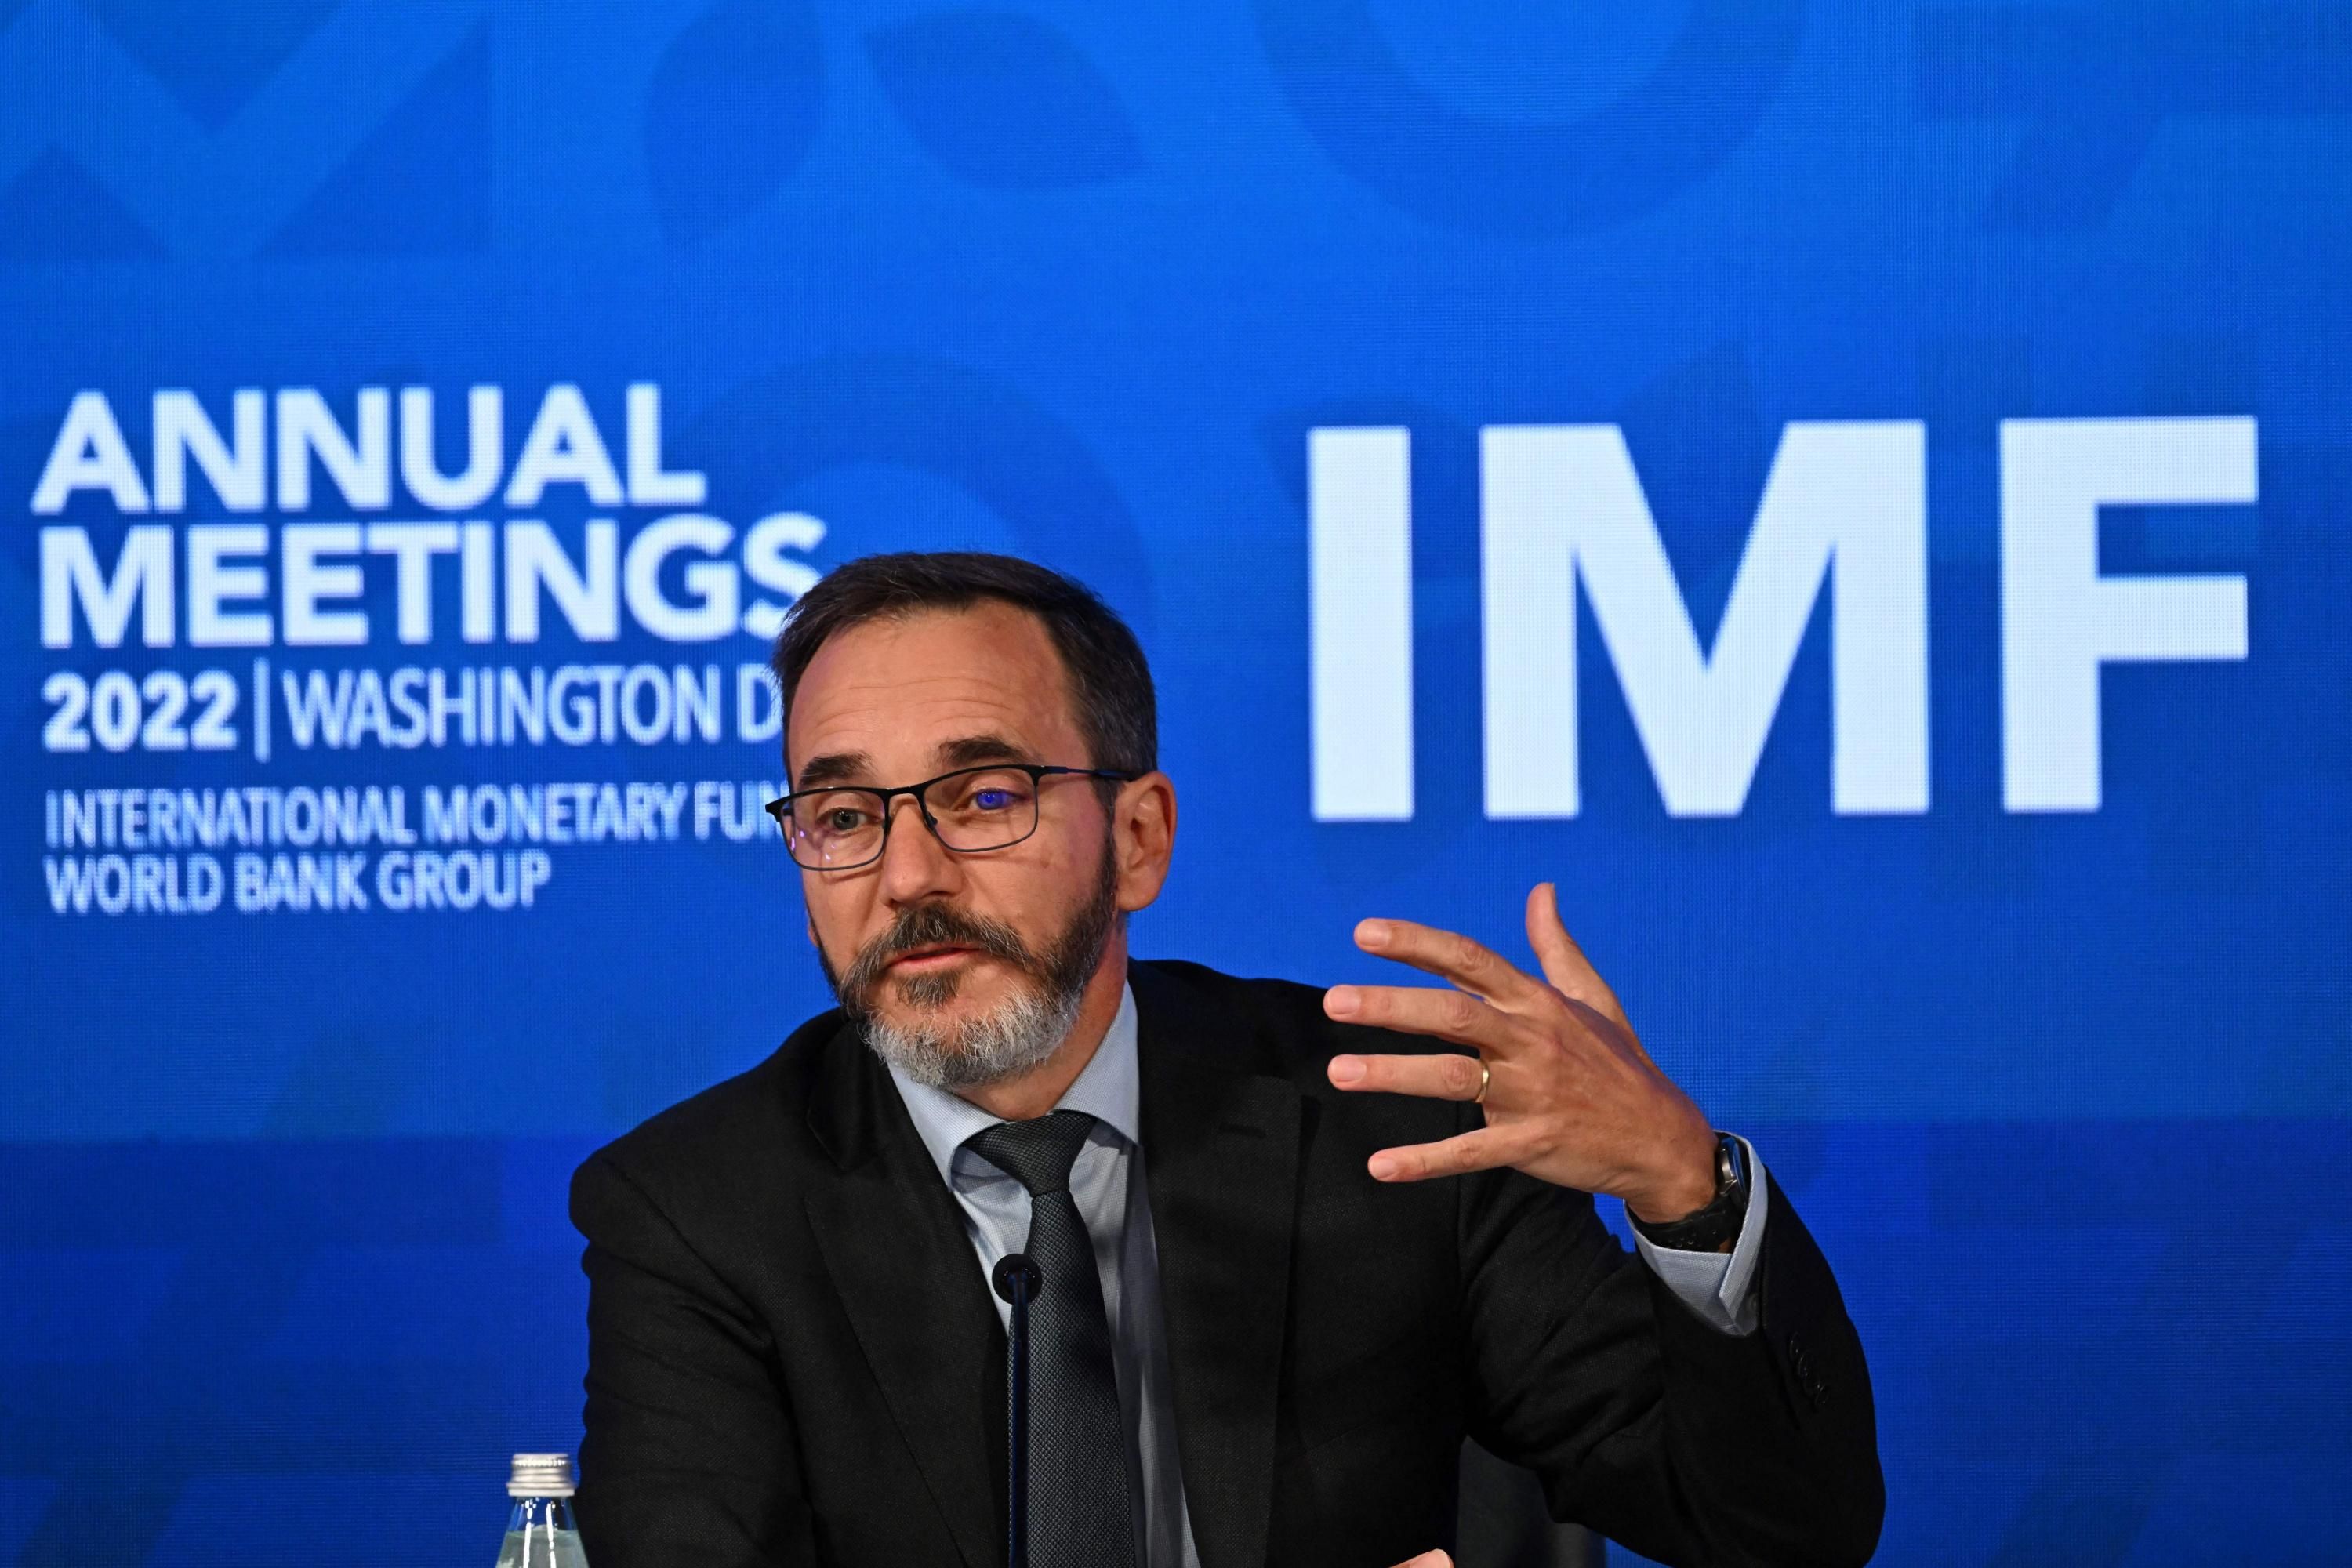 The chief economist of the IMF speaks during a press conference